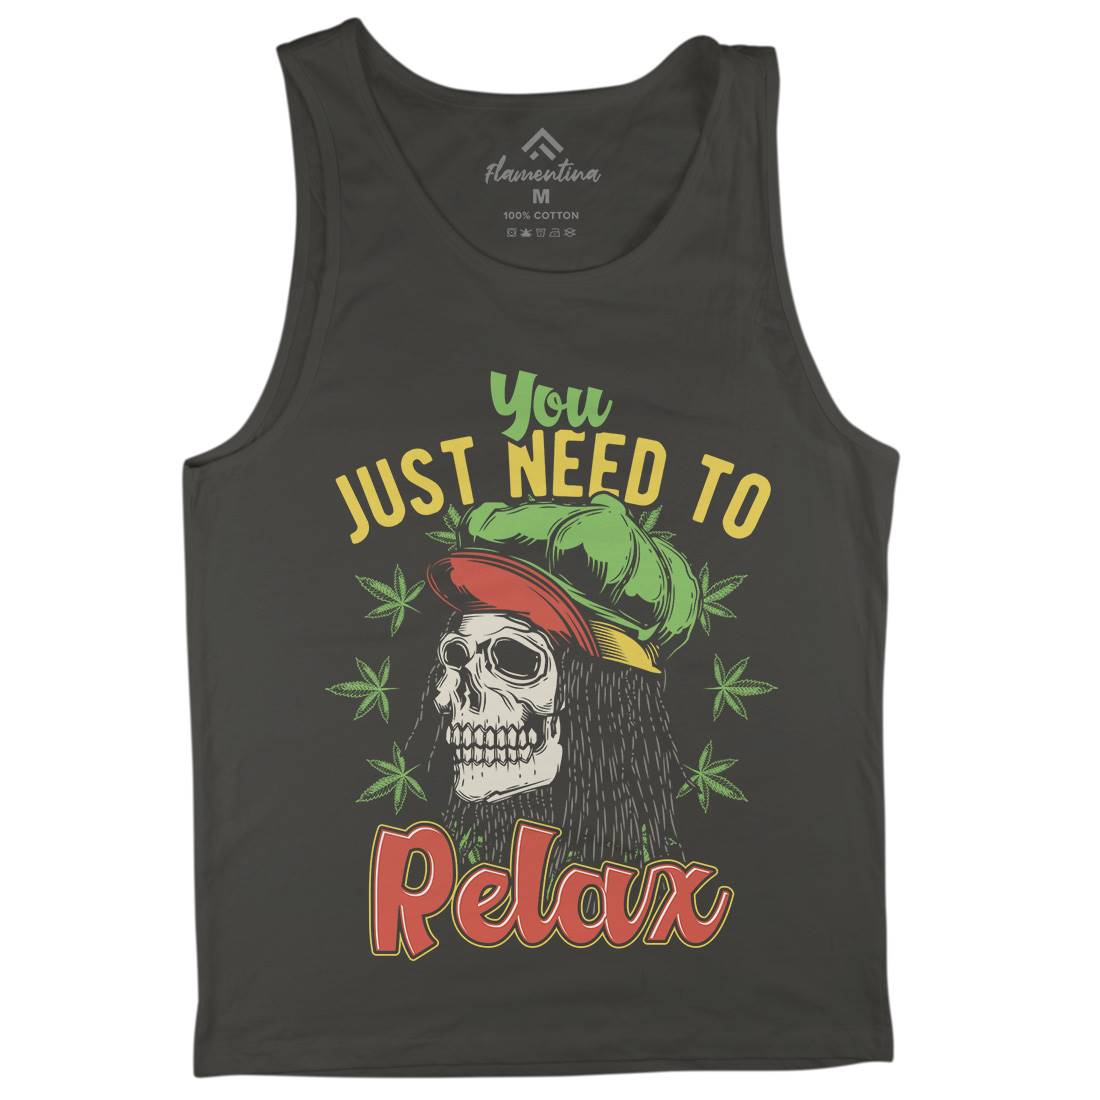 Need To Relax Mens Tank Top Vest Drugs B804